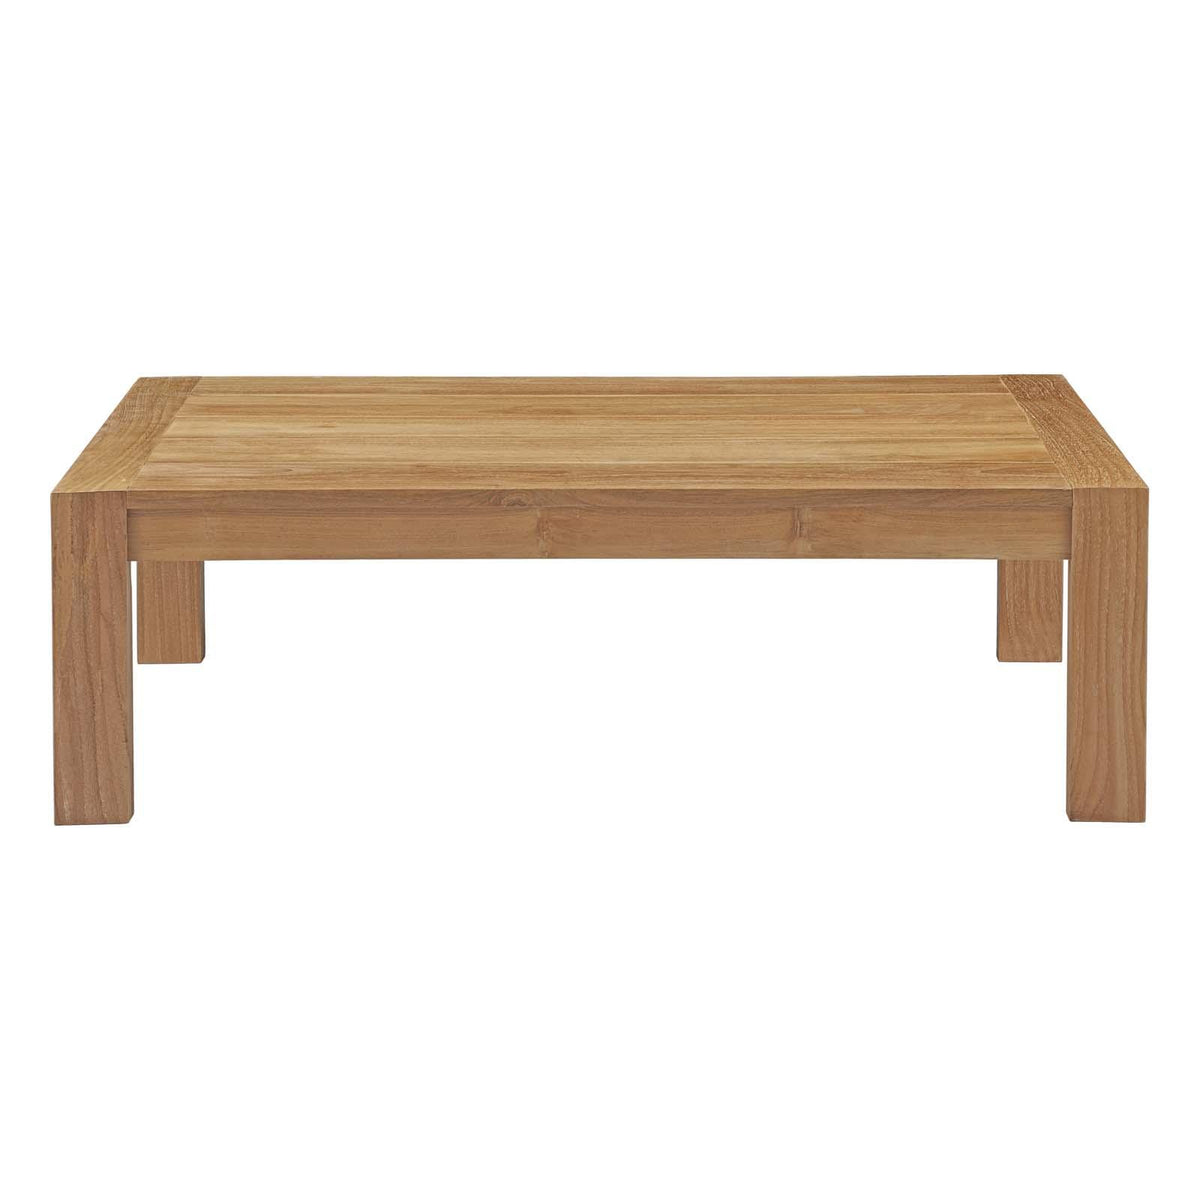 Modway Furniture Modern Upland Outdoor Patio Wood Coffee Table - EEI-2710